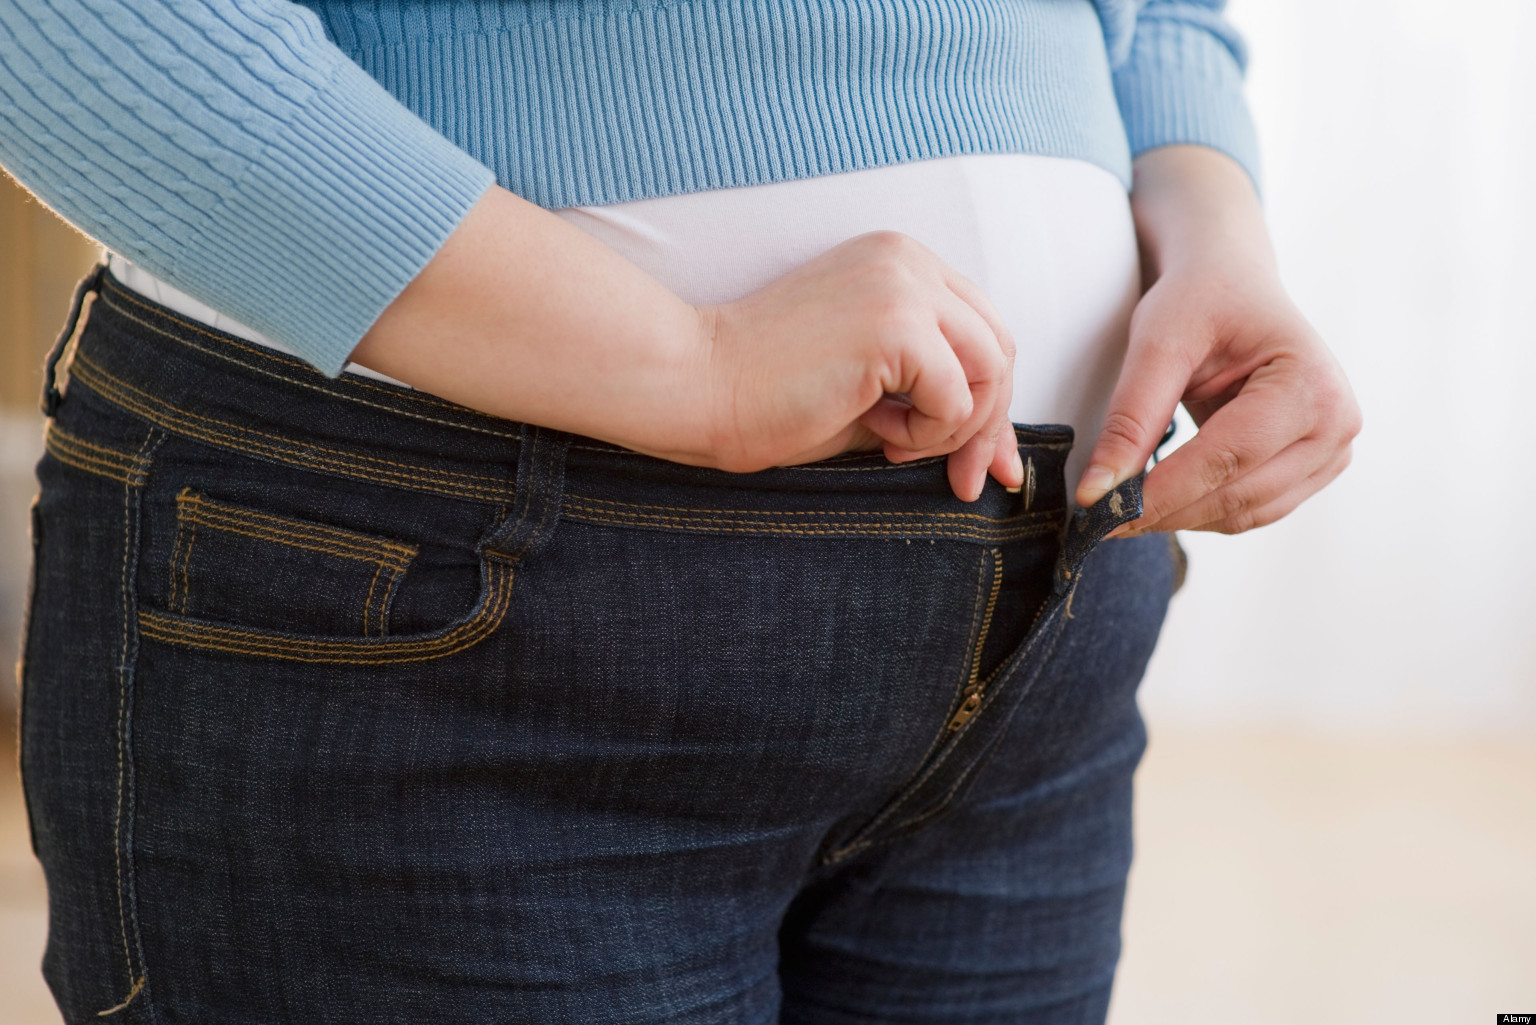 Overweight Women Warned Of Life Threatening Health Risks During